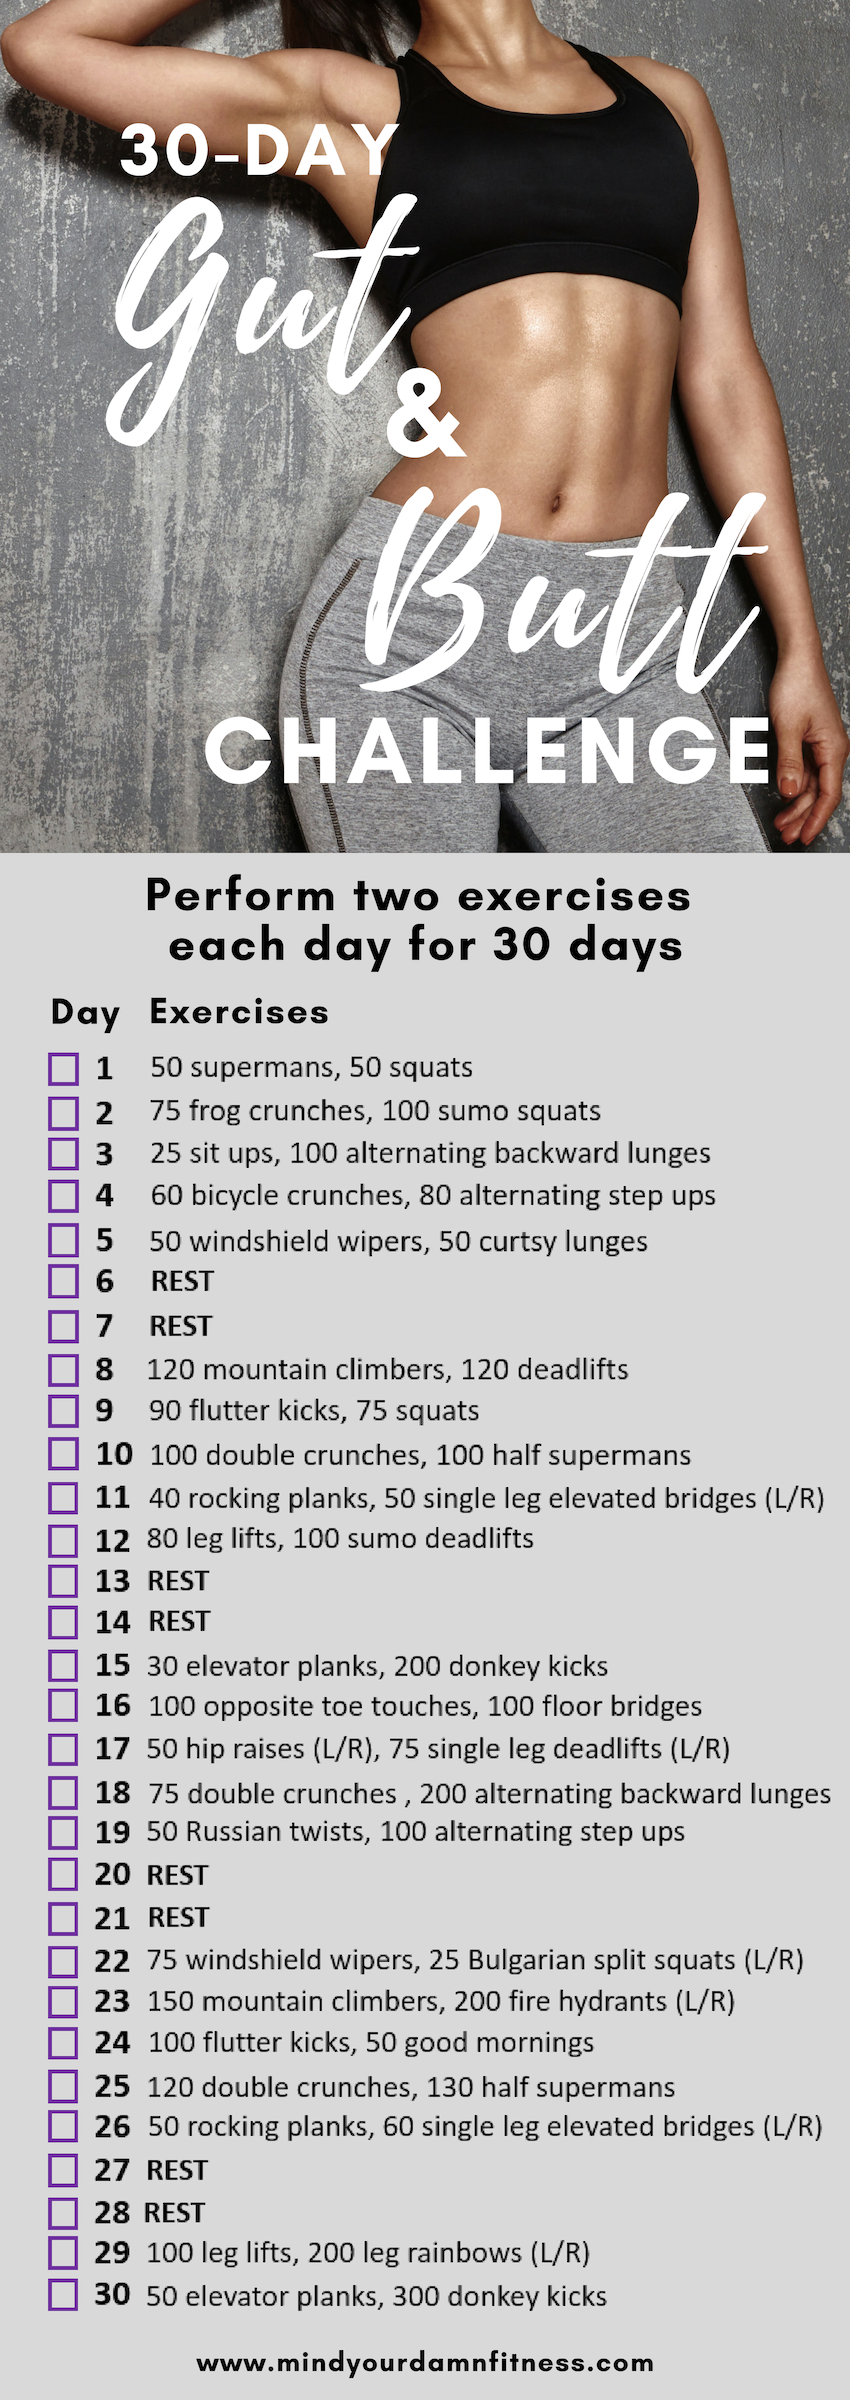 The Ultimate 30-Day Gut and Butt Challenge – Mind Your Damn Fitness - The Ultimate 30-Day Gut and Butt Challenge – Mind Your Damn Fitness -   18 fitness Training inspiration ideas